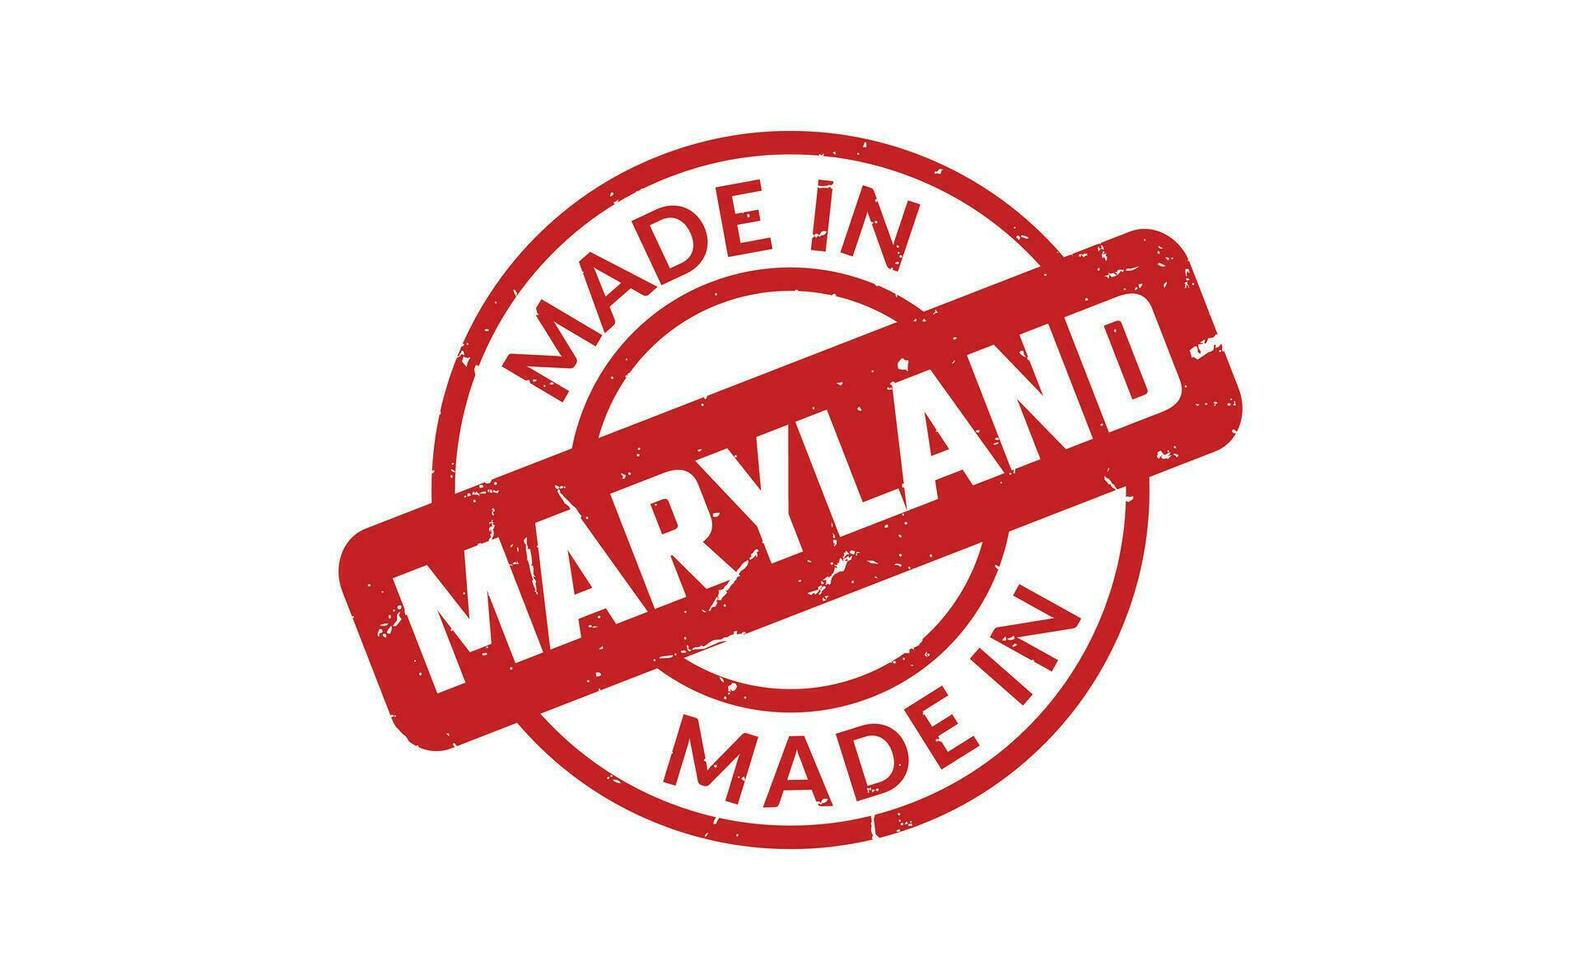 Made In Maryland Rubber Stamp vector